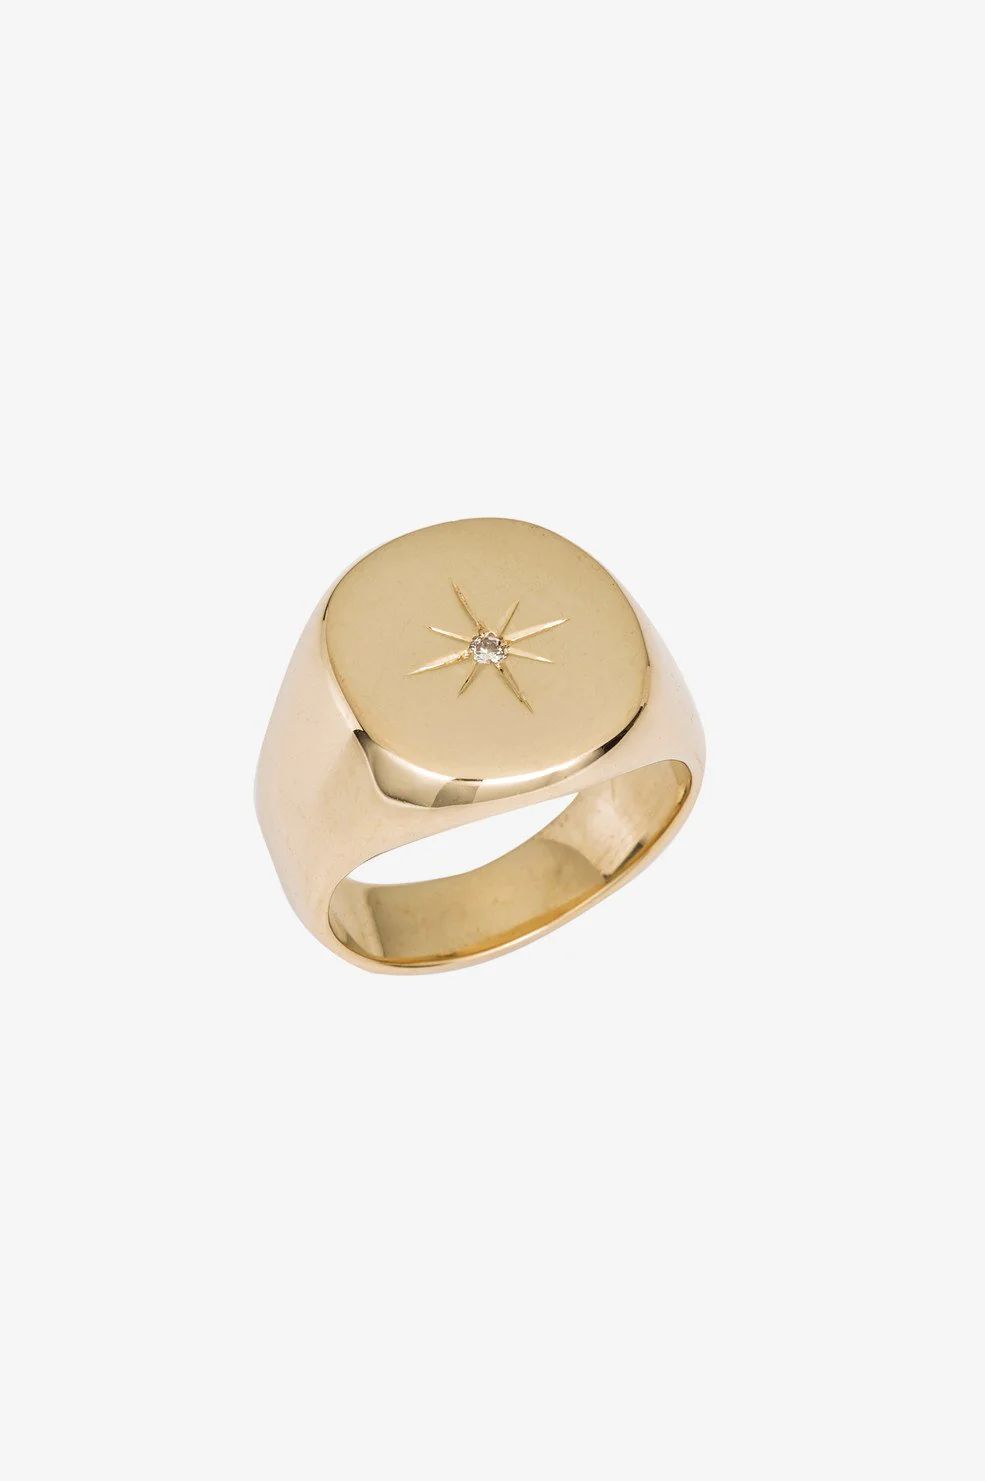 GOLD RING WITH DIAMOND STAR | Anine Bing Global